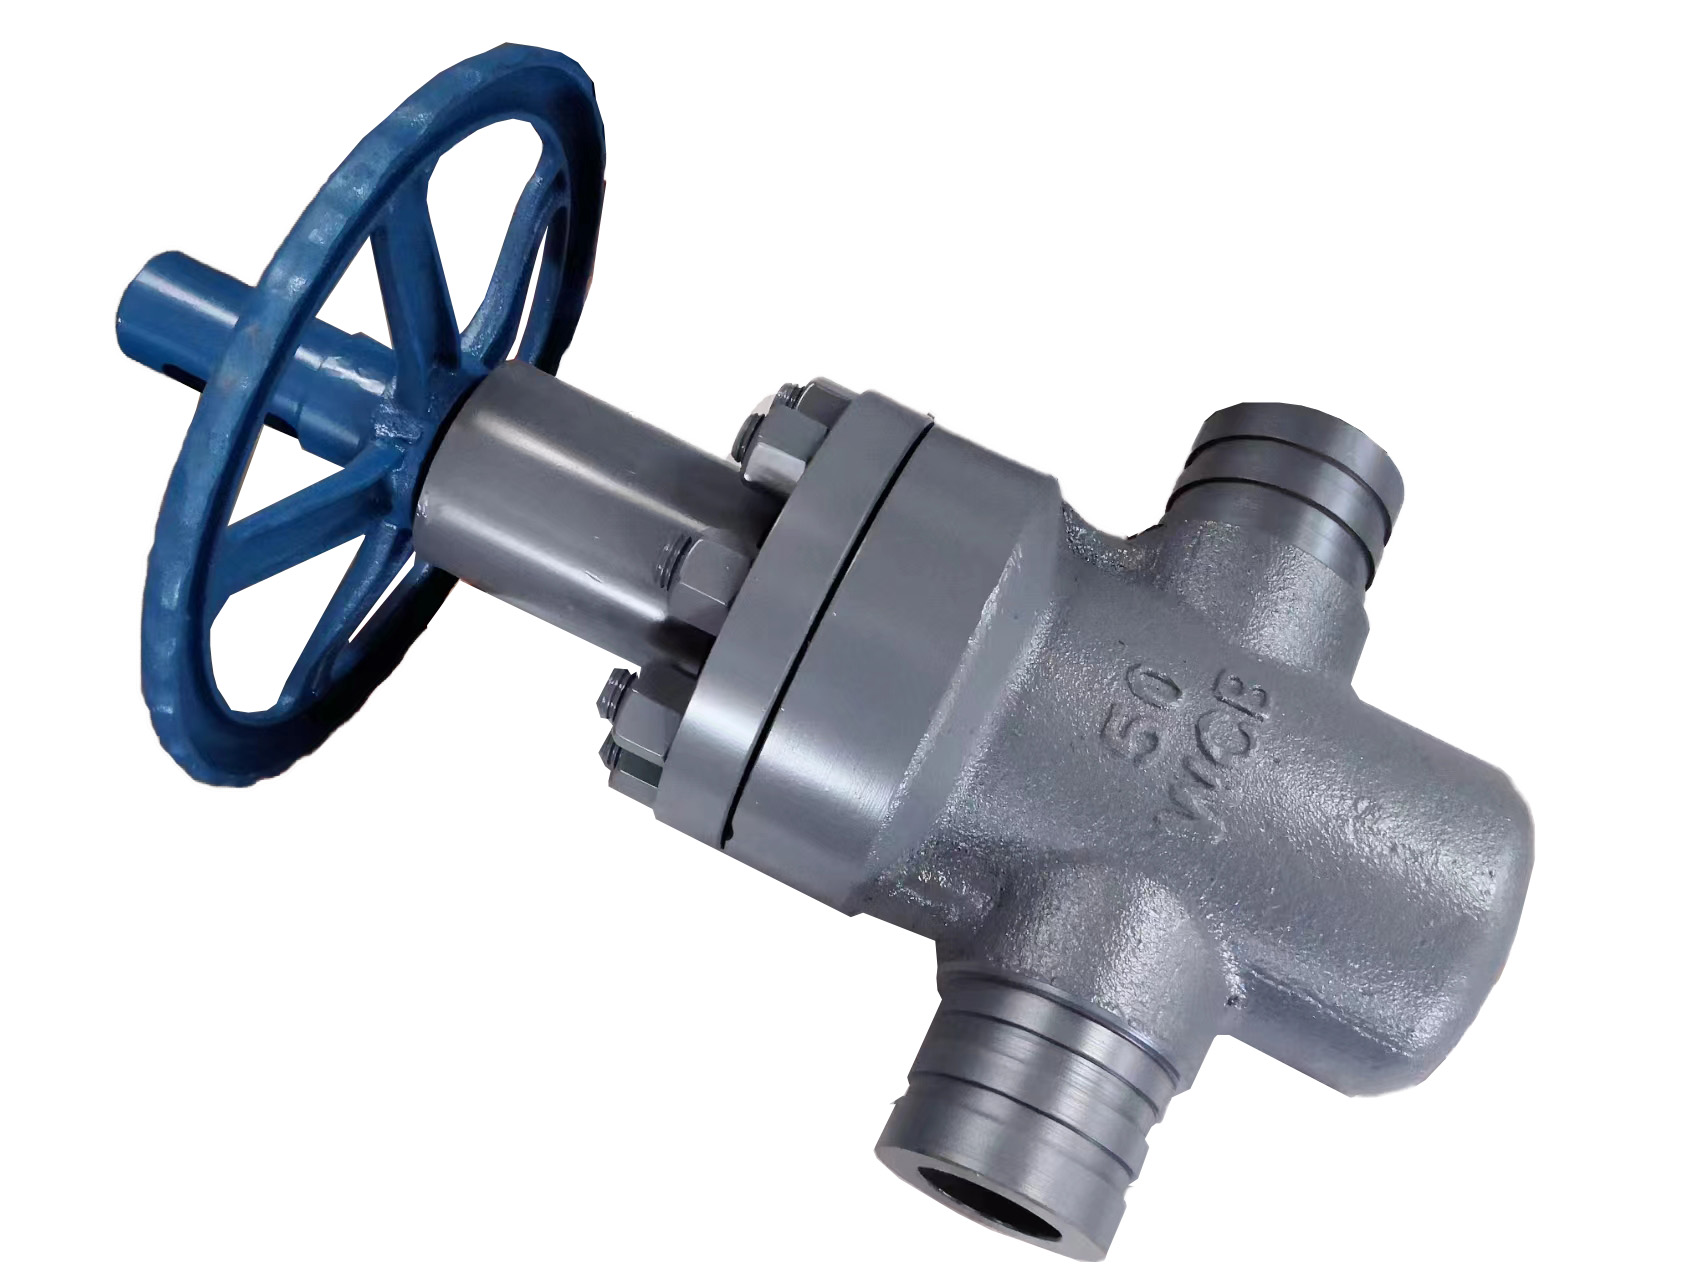 The groove is connected to the elevating UHV flat gate valve